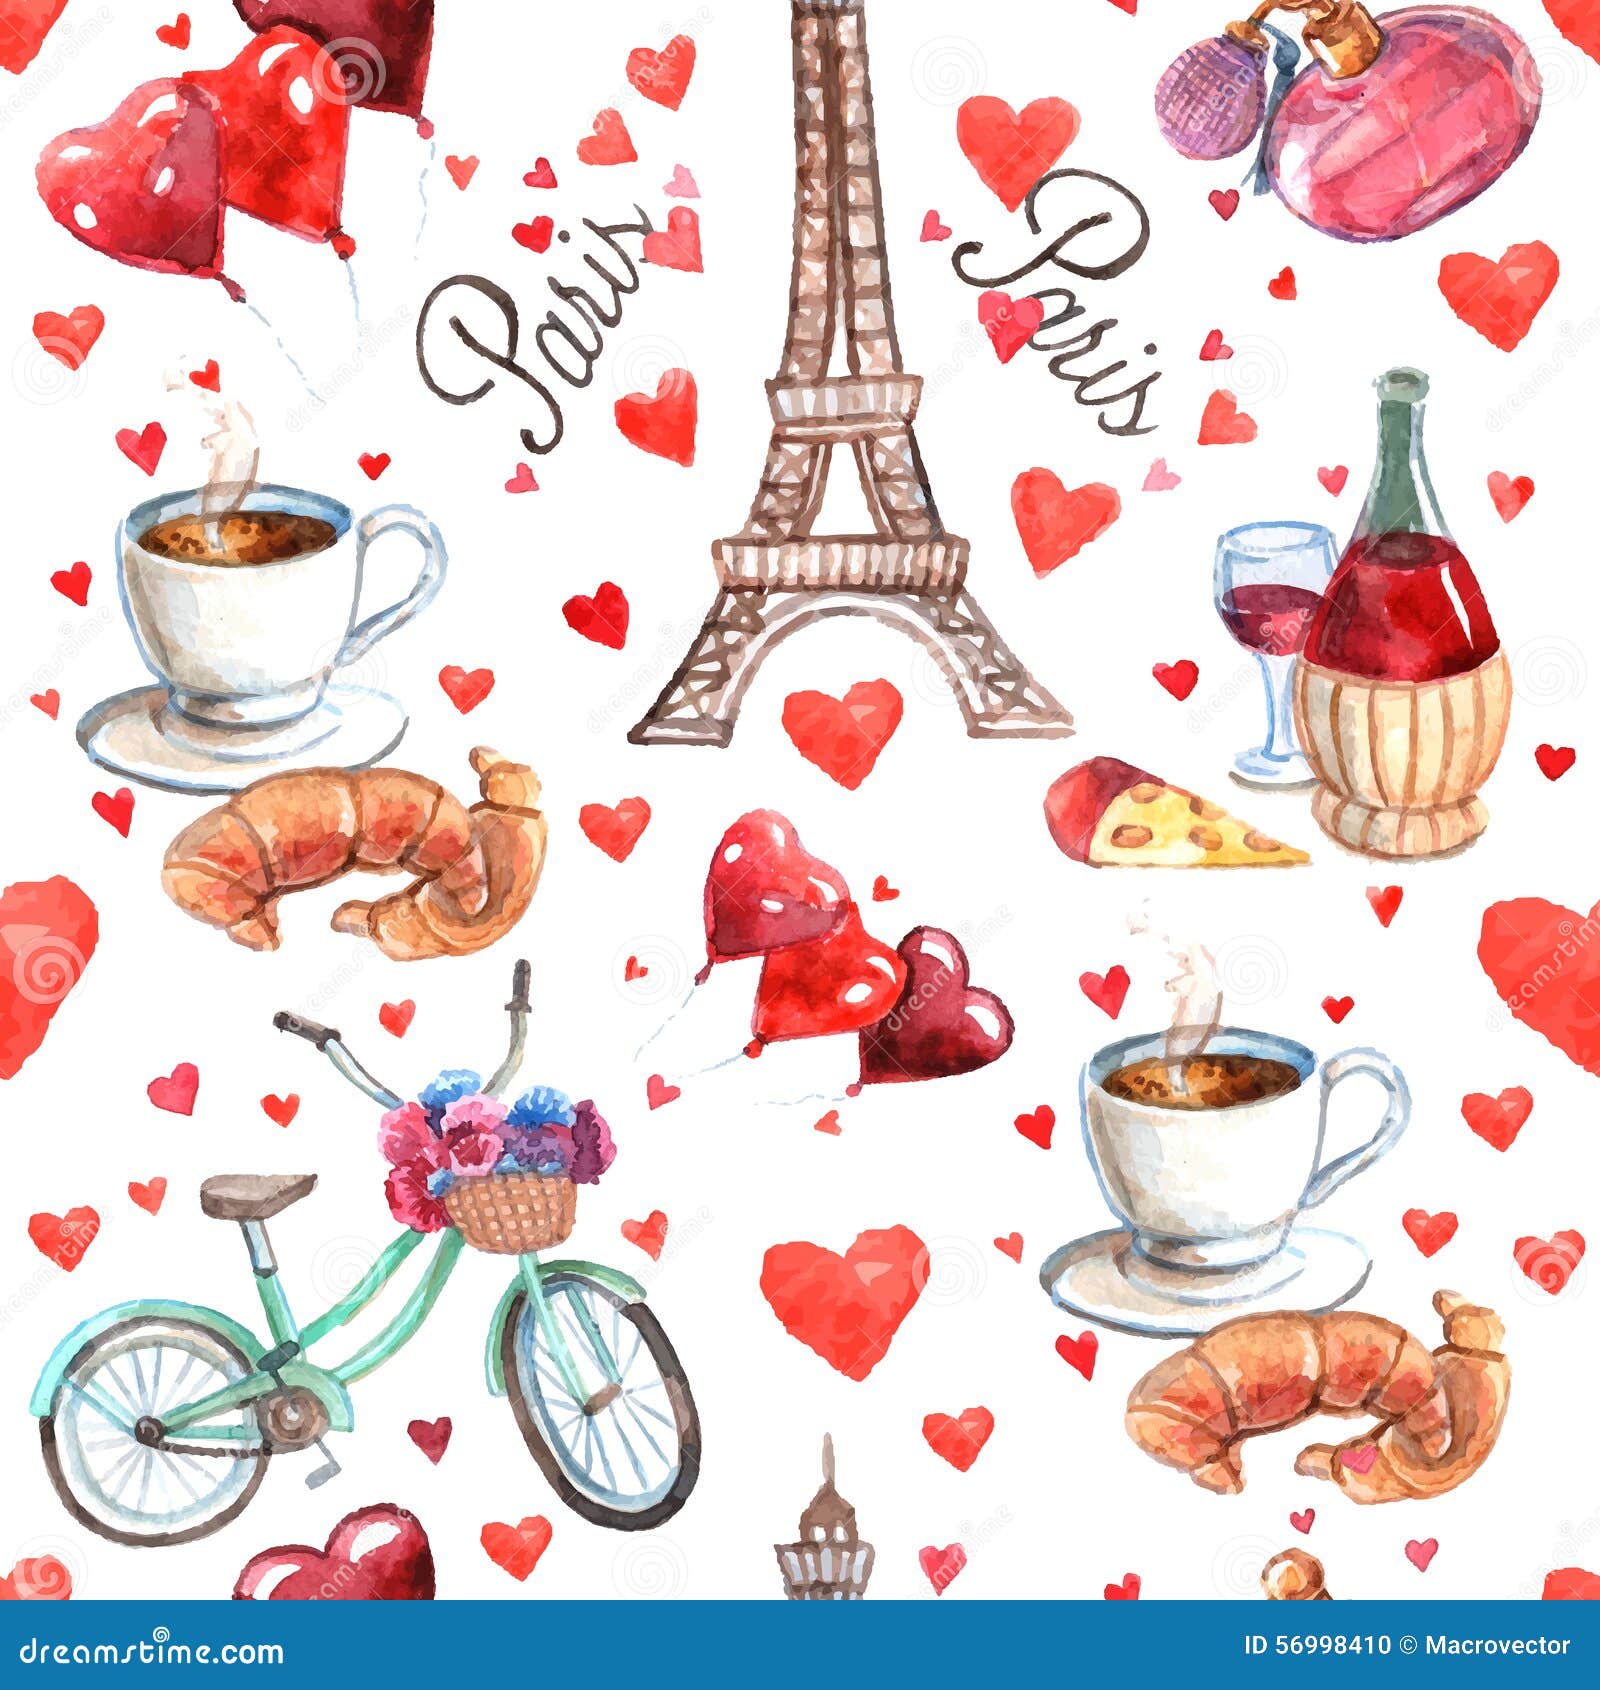 Romantic Set Signs of France in the Form of a Drawings by Colored Pens on  the Squared Paper Stock Vector - Illustration of clipart, cheese: 110228439